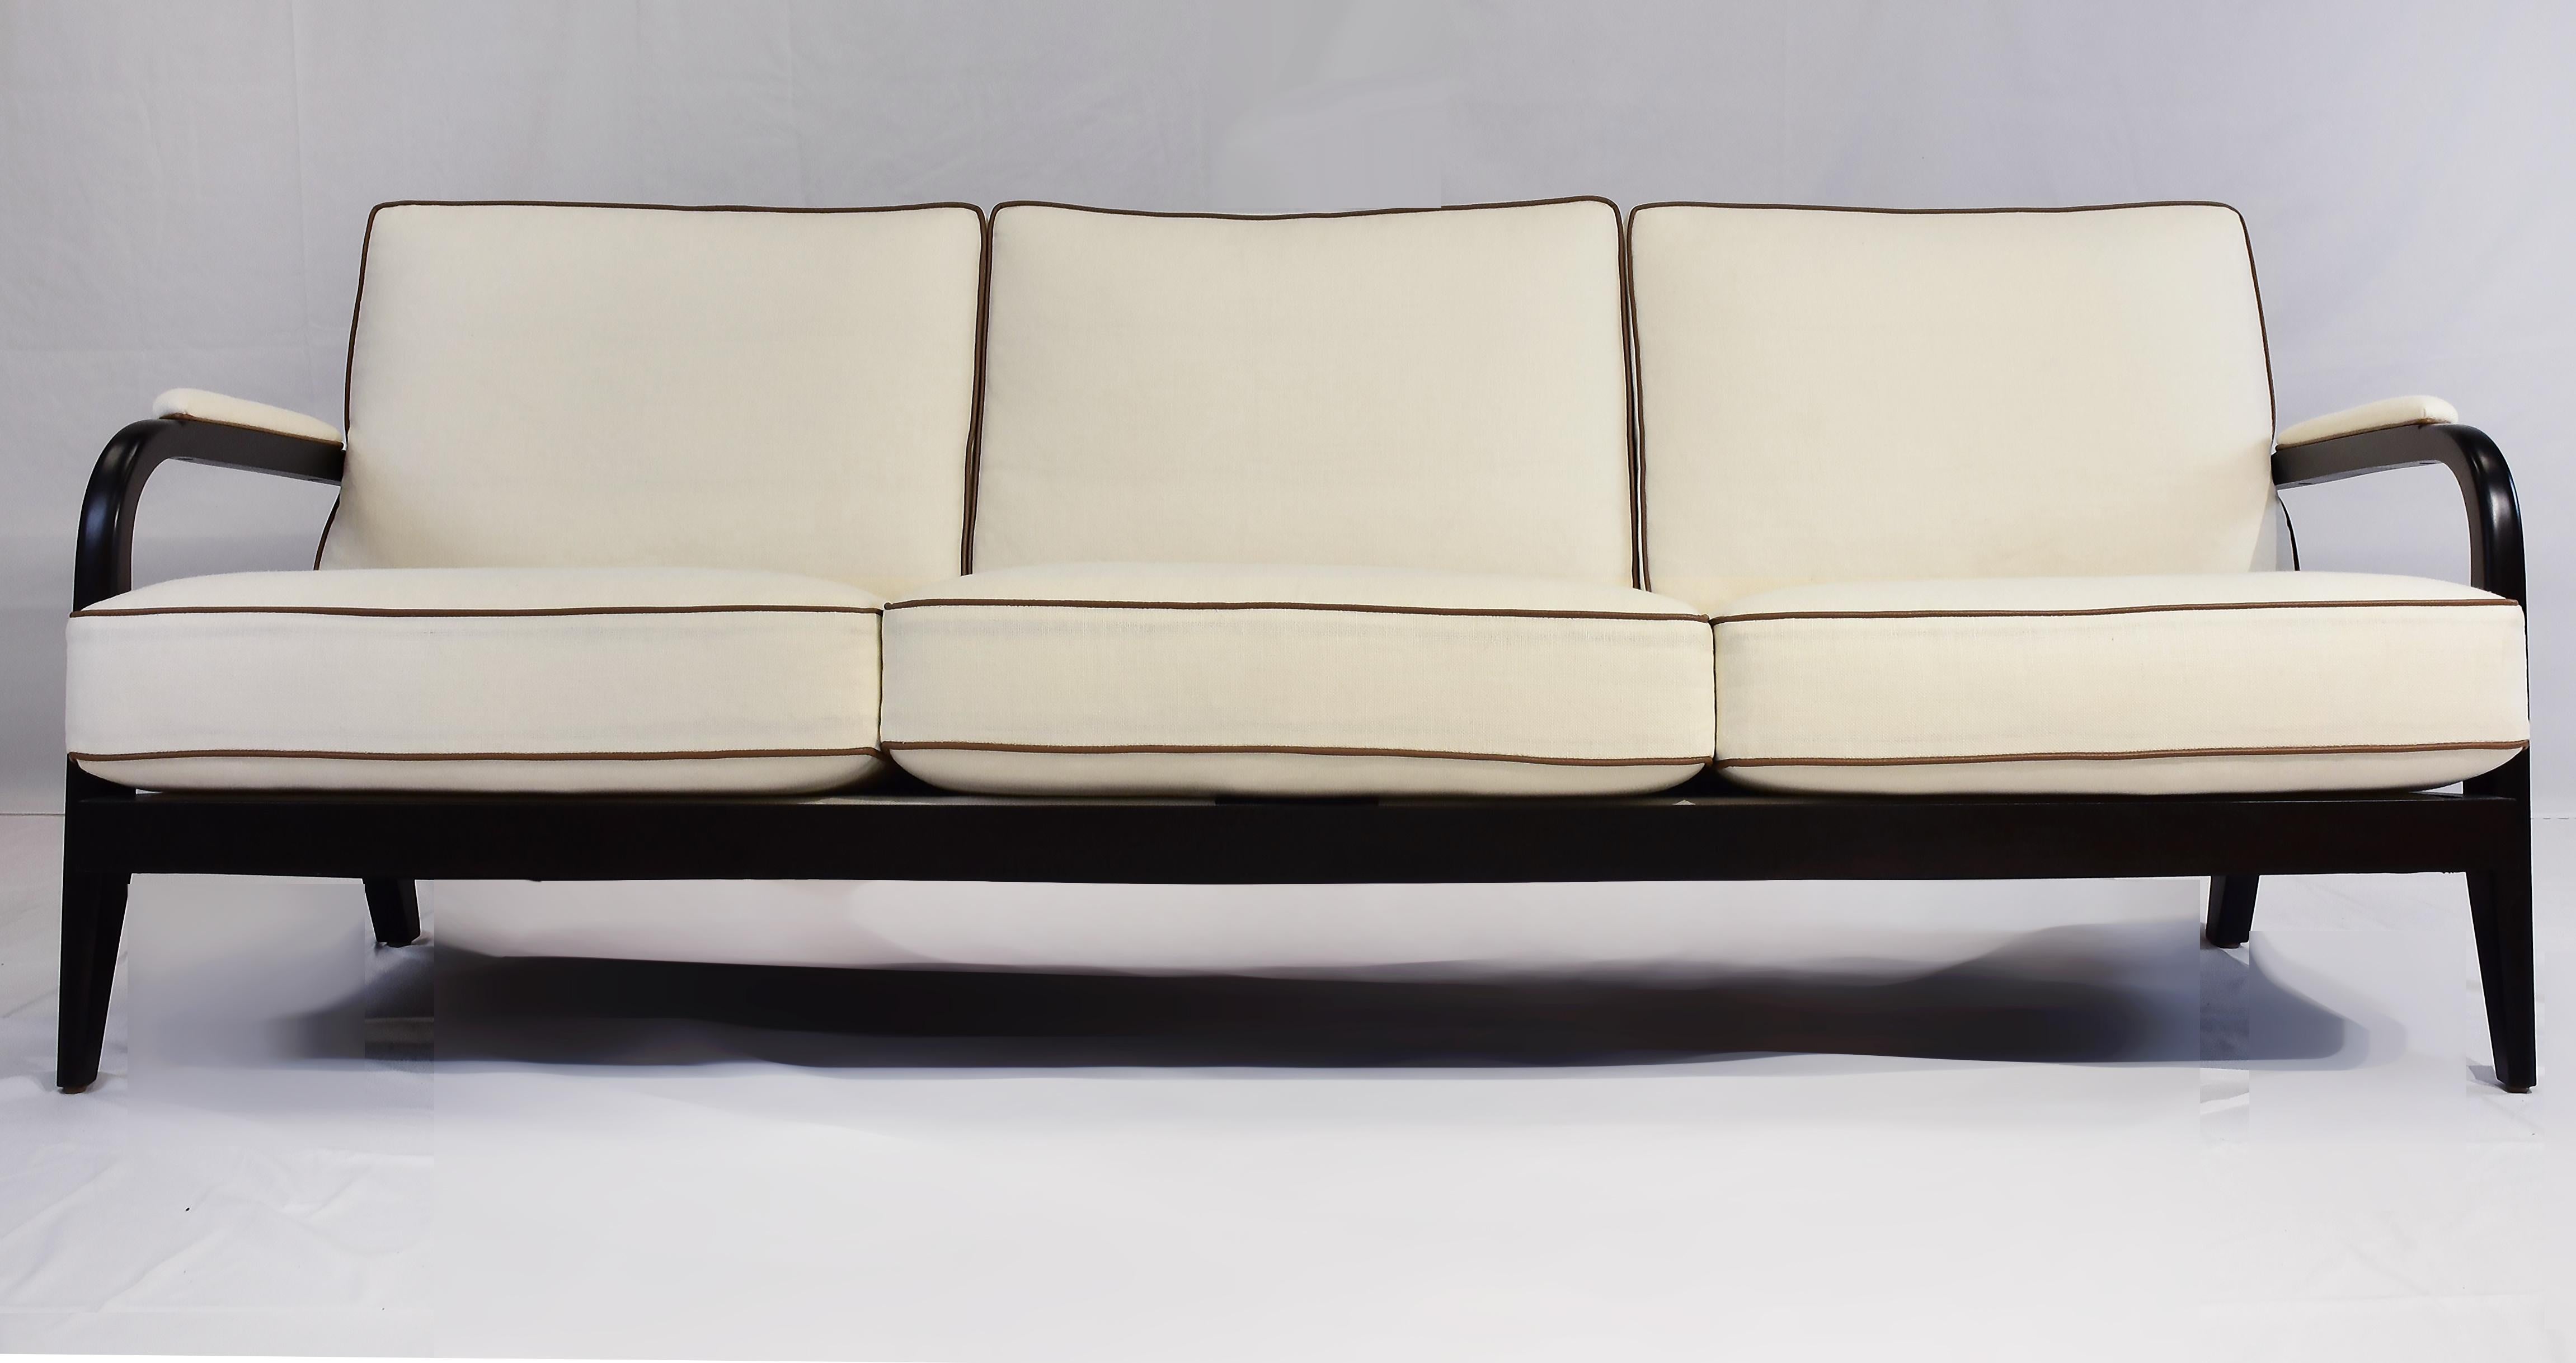 Le Jeune Upholstery 3 Seat Club Havana Sofa Floor Model, Walnut Finished Mahogany

Offered for sale is a three-seat sofa by Le Jeune Upholstery styled as a classical 50s modern design using Mahogany hardwood for the frame. The sofa has three loose